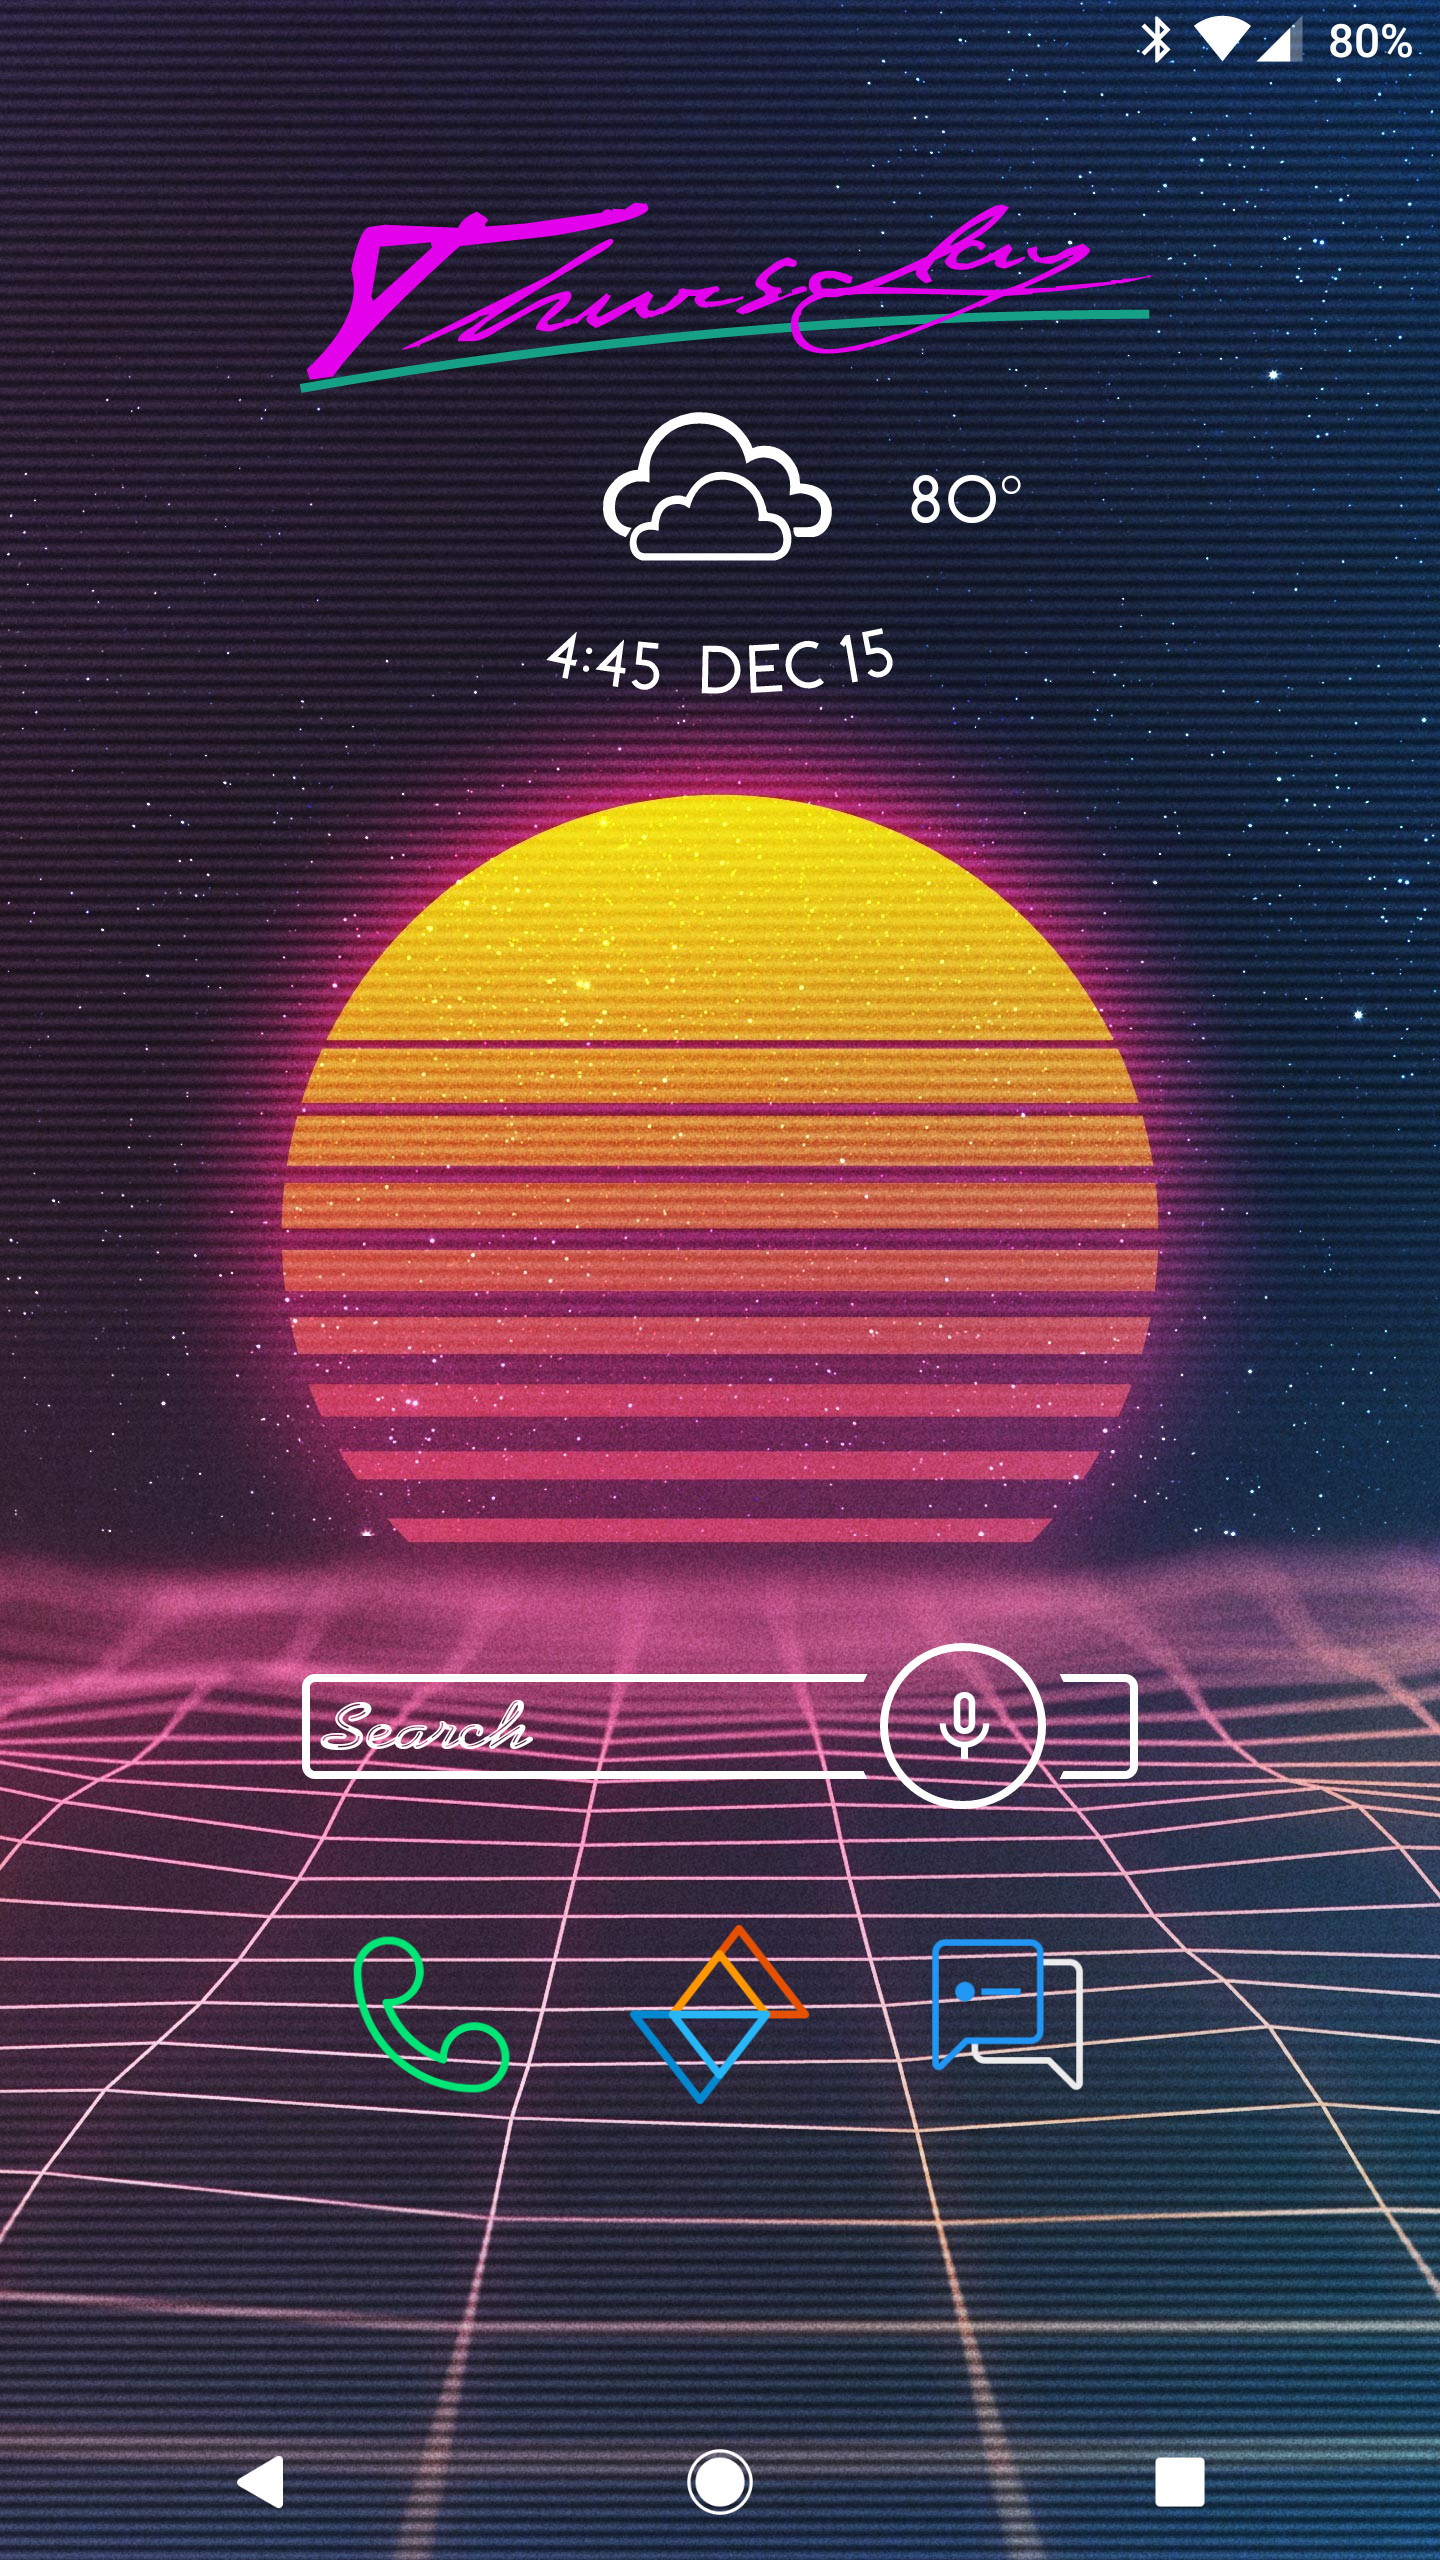 1440x2560 Recently watched San Junipero. I loved it so much I decided to make a home  screen with some similar aesthetics ...